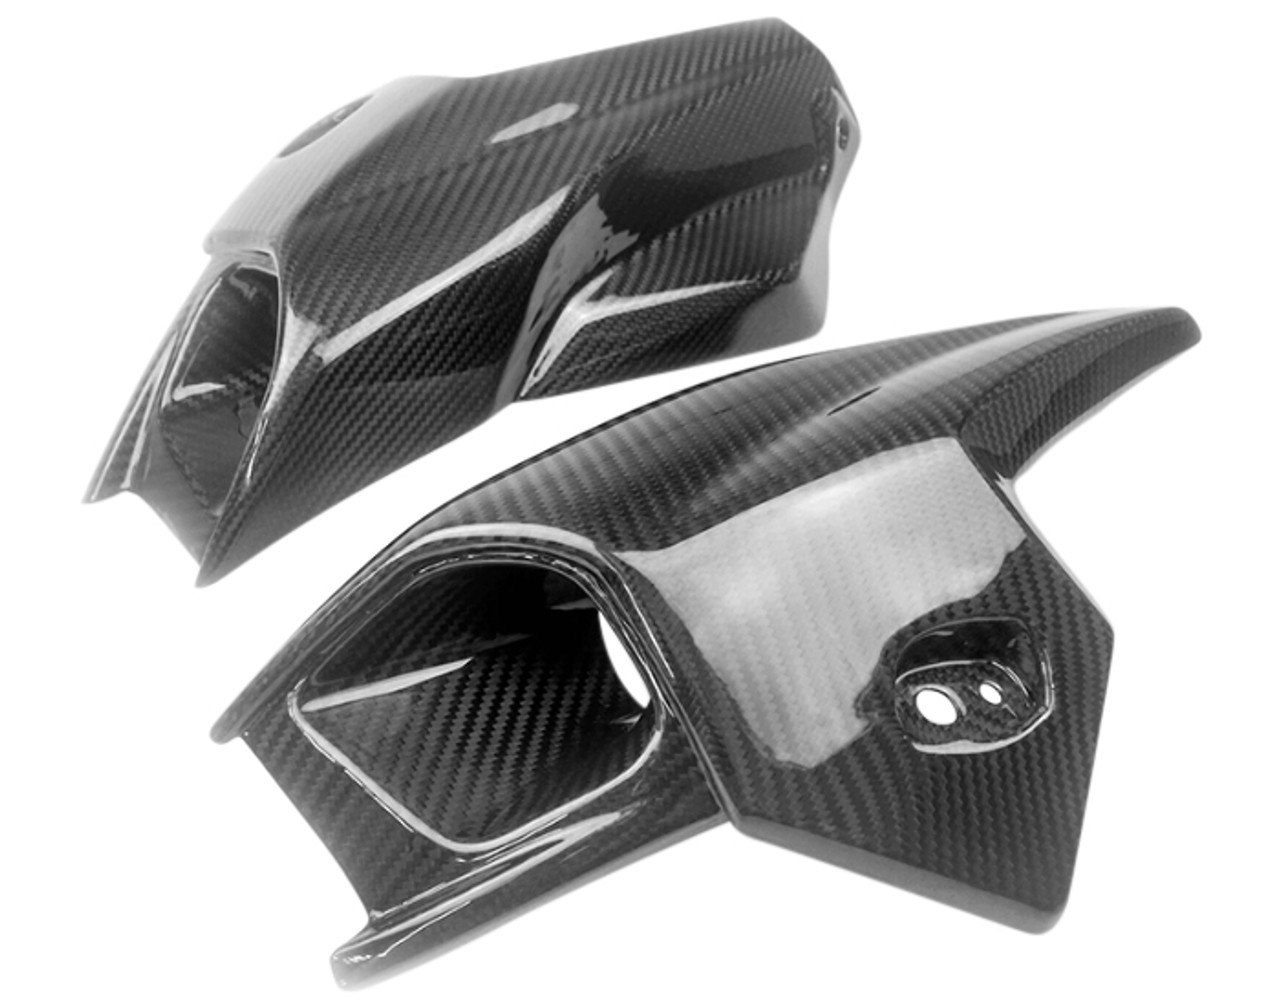 Tuning Air Intake Covers Set in Glossy Twill Weave  Carbon Fiber for BMW K1300R